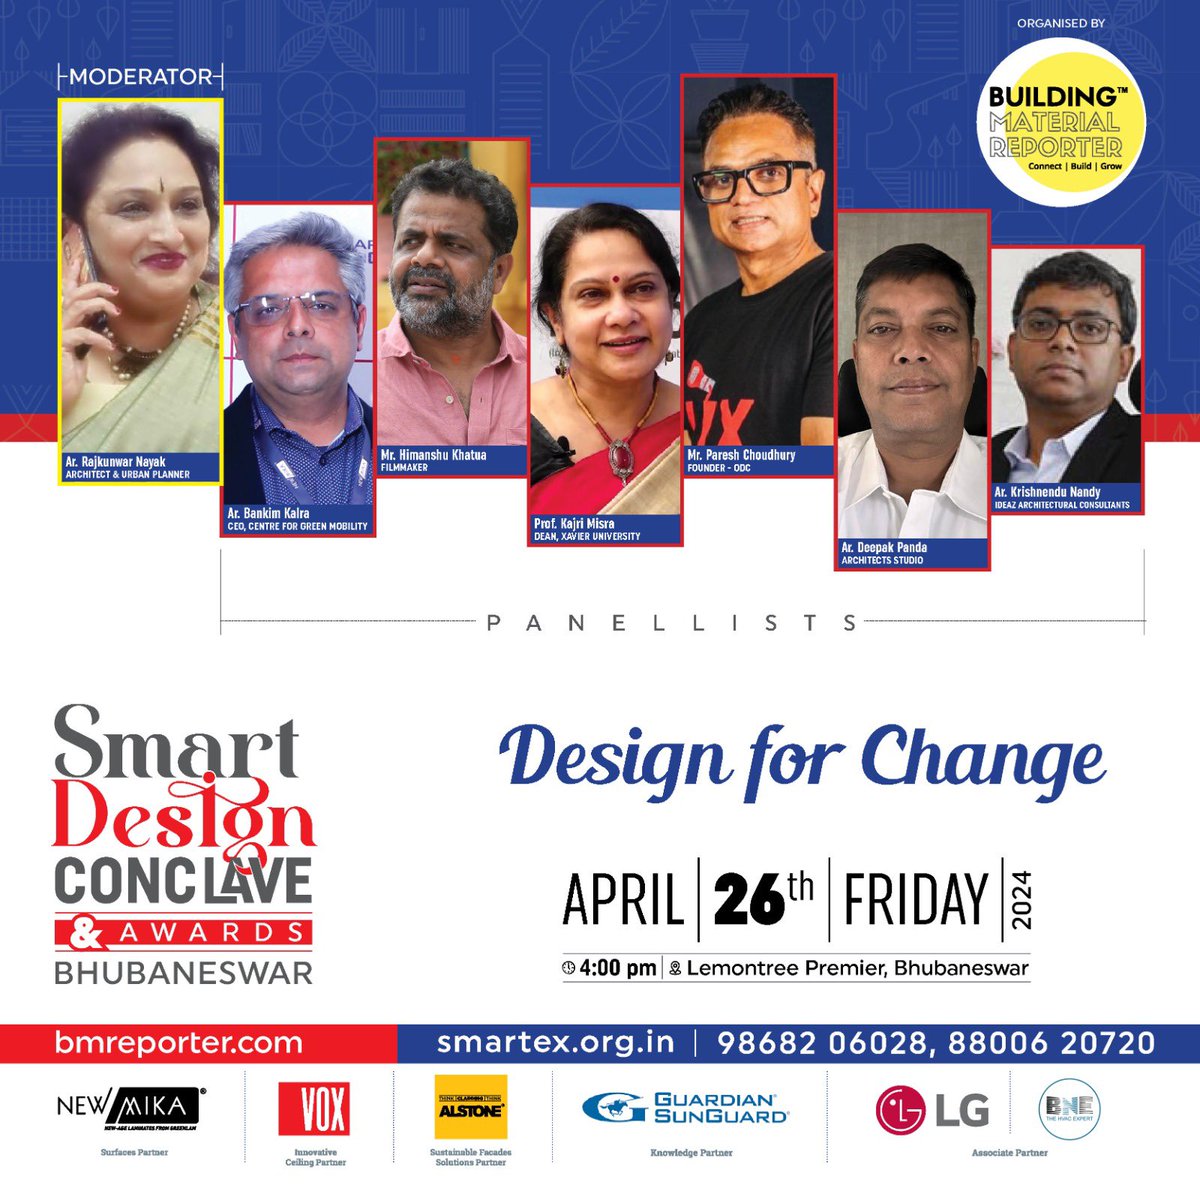 Excited to join esteemed panelists at the 'Smart Design Conclave Awards' in #Bhubaneswar discussing 'Design for Change' and its impact on evolving urban dynamics. Let's share our insights and shape the future together! #SmartDesign #Panelist #DesignForChange